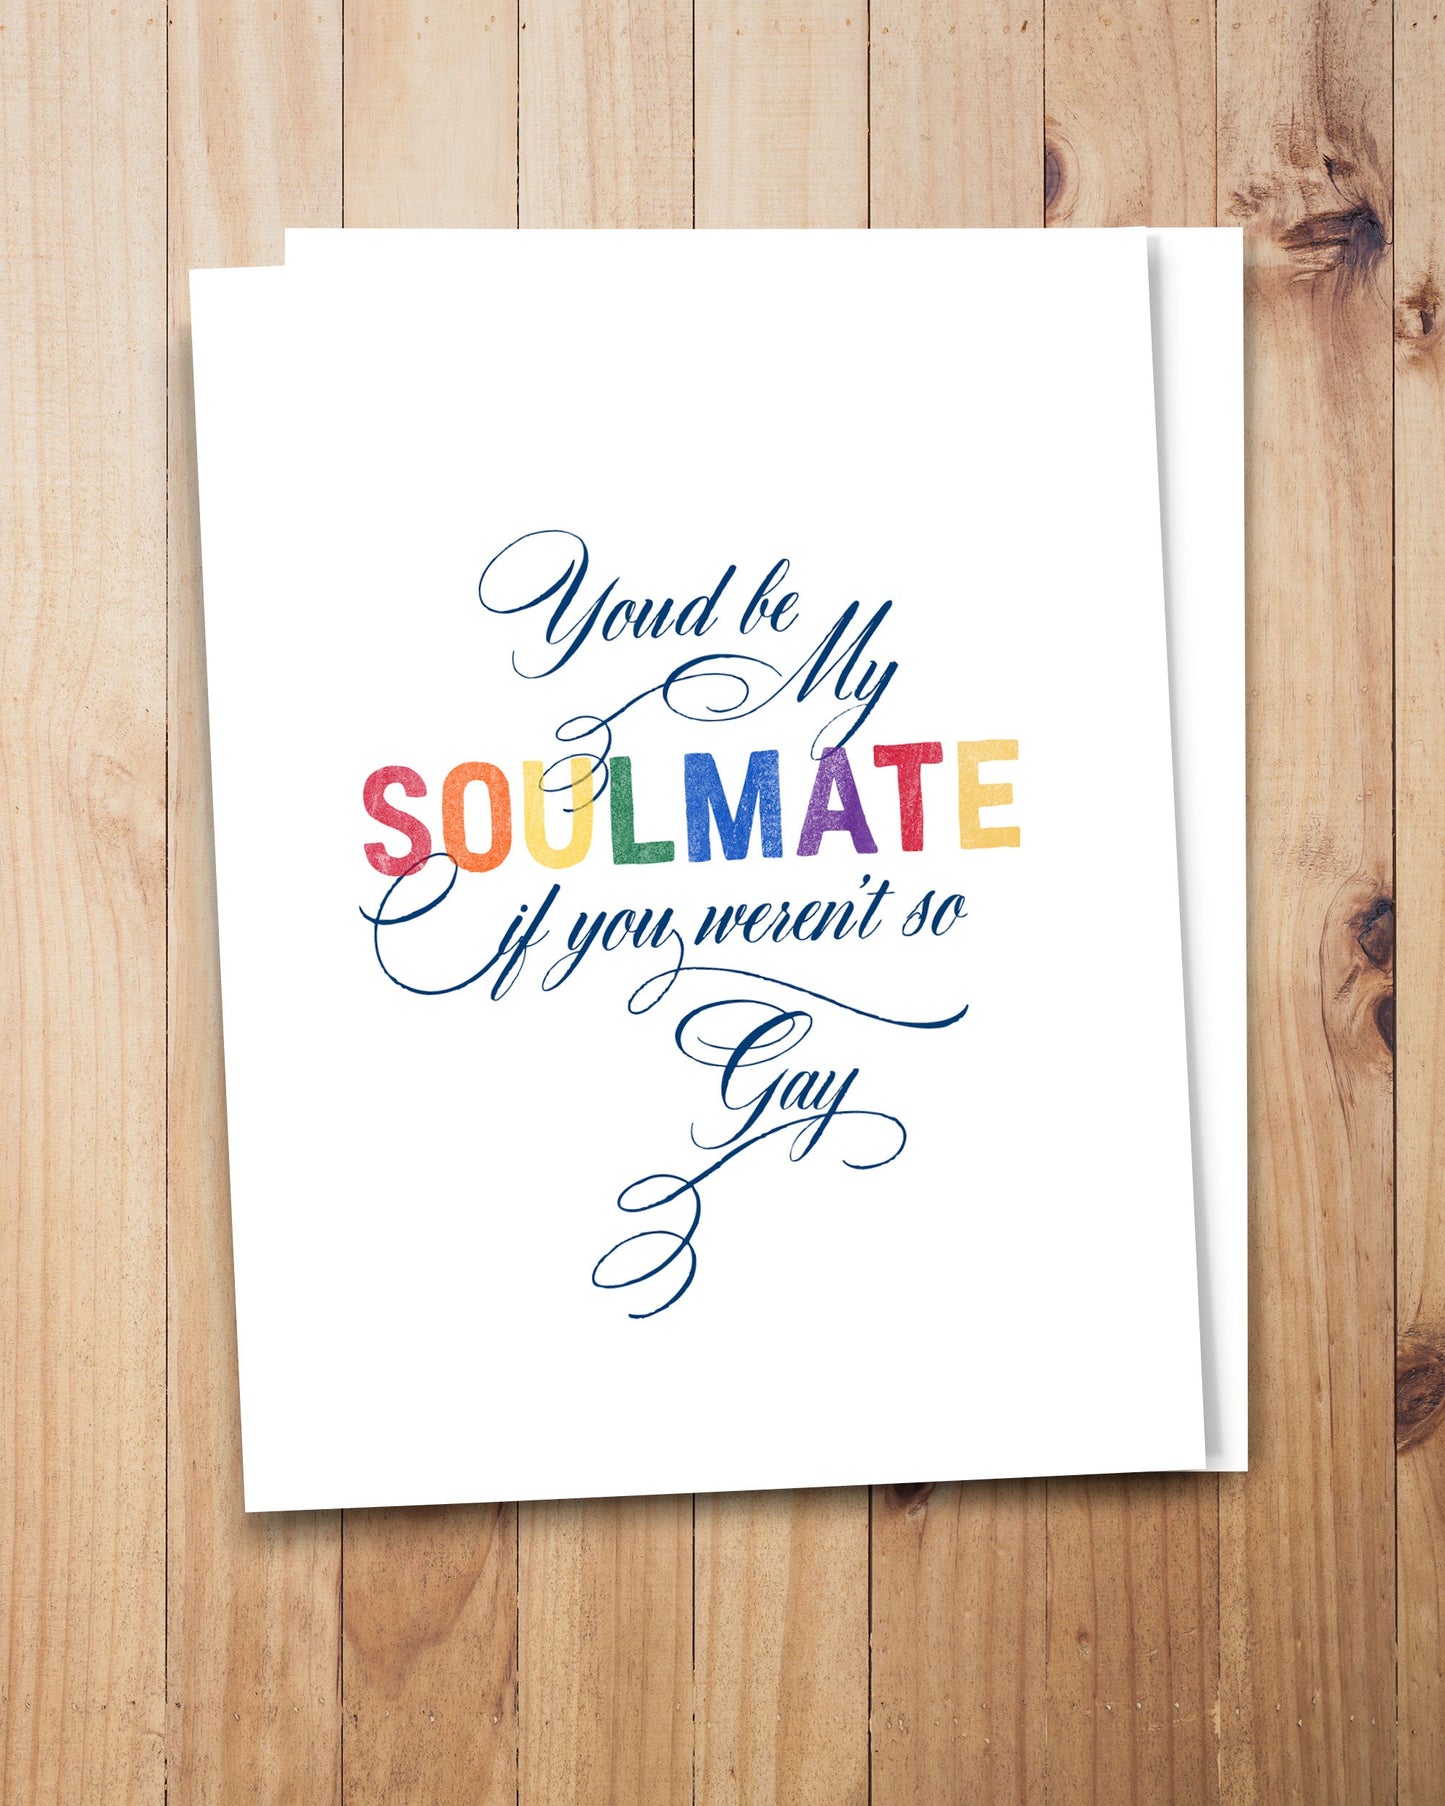 My Gay Soulmate Card for queer friend - Transit Design - Smirkantile